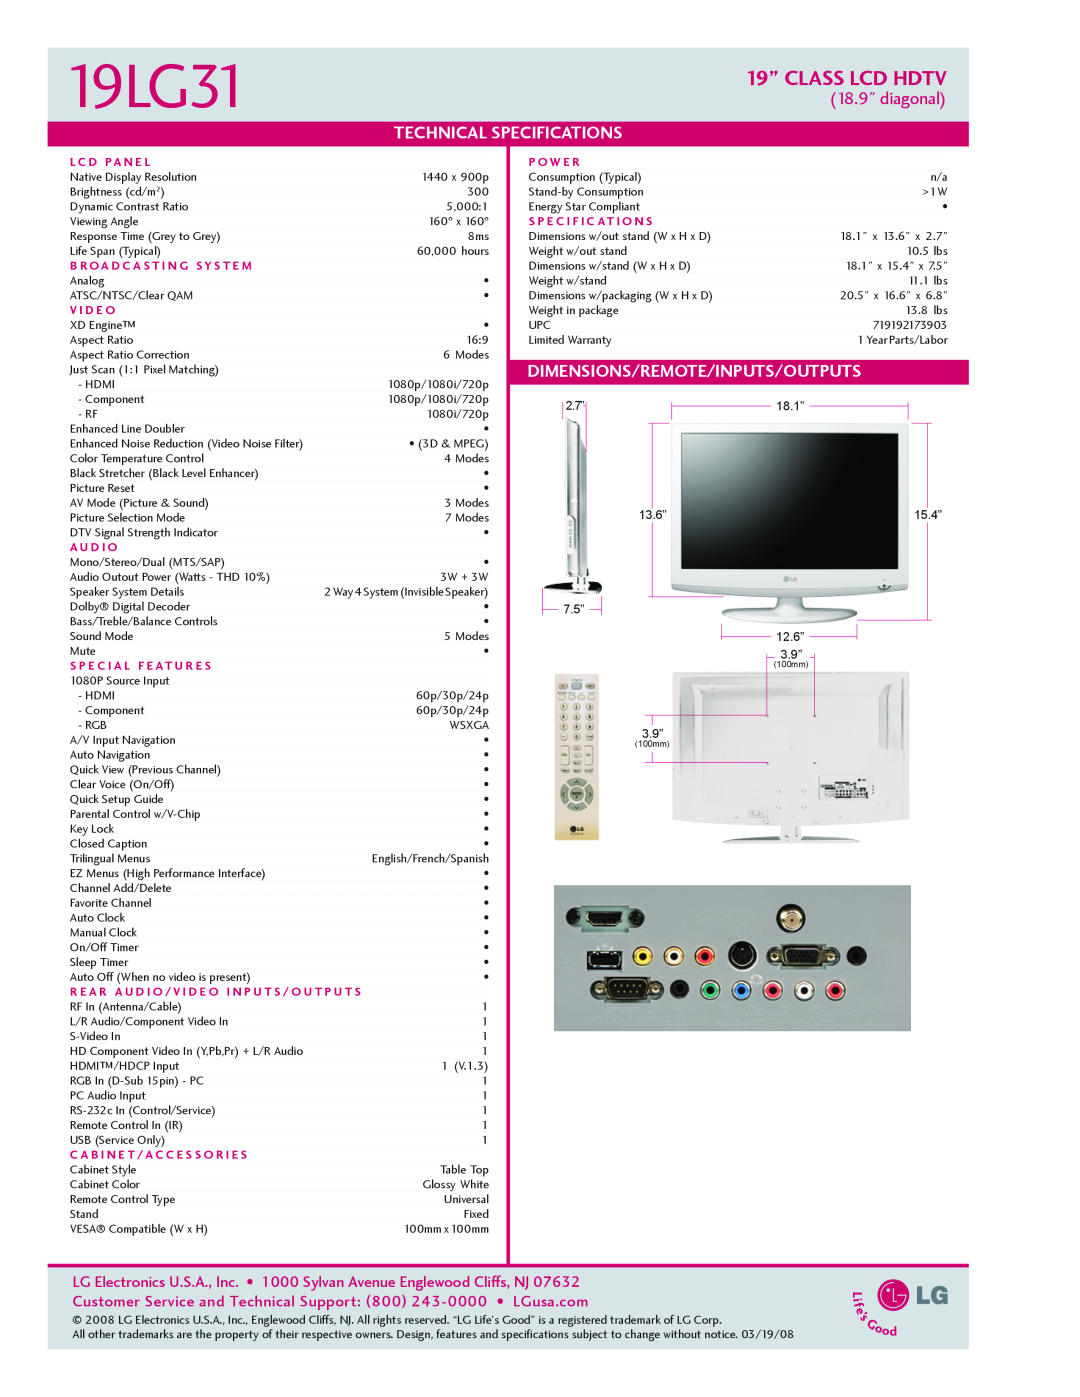 Goldstar 19LG31 18.9” diagonal, 19” CLASS LCD HDTV, Technical, Specifications, Dimensions/Remote/Inputs/Outputs, P O W E R 